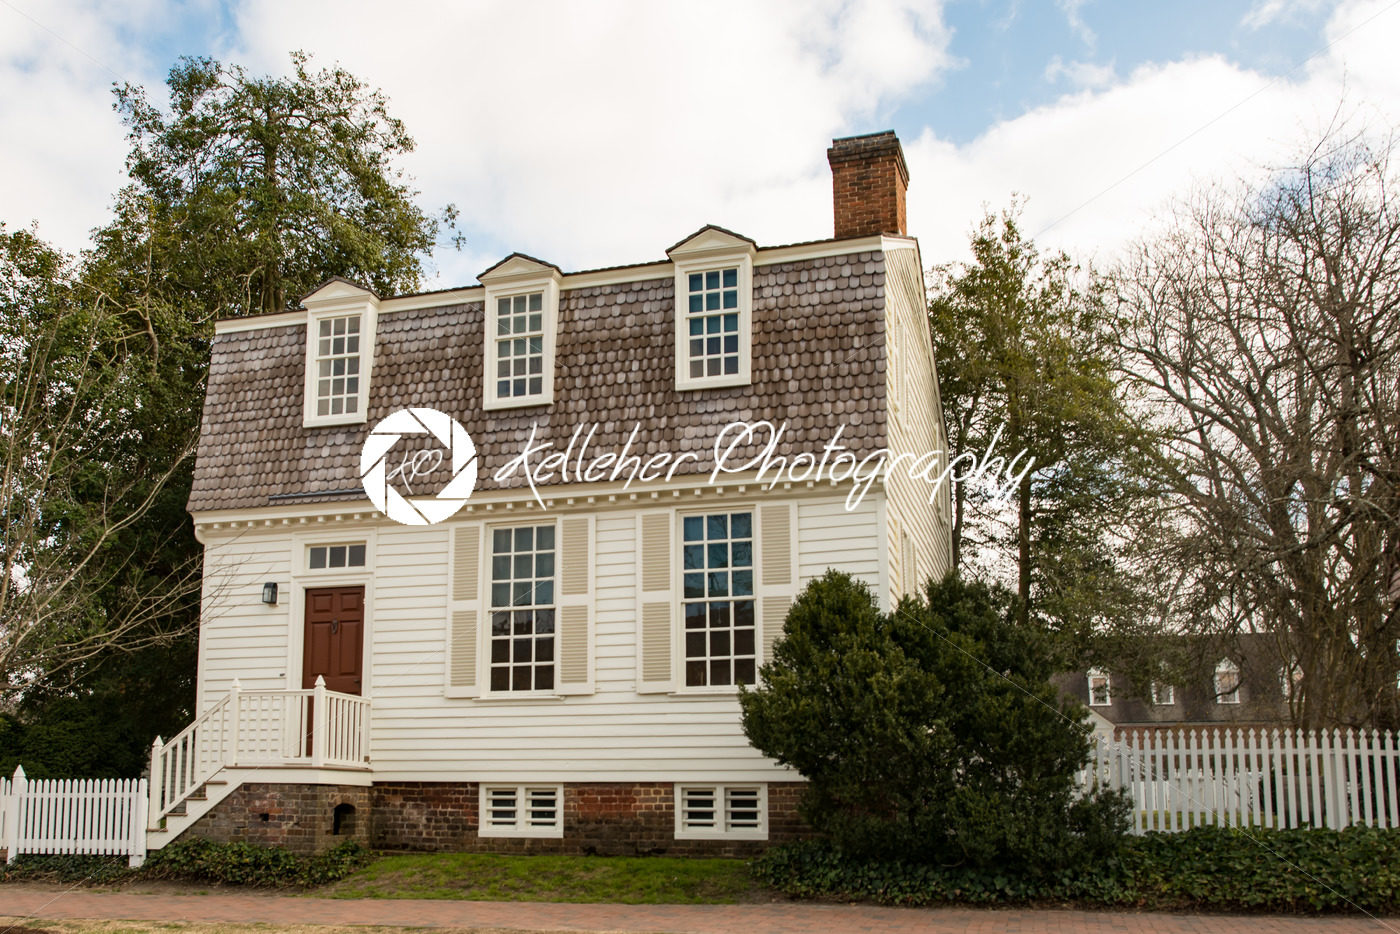 Williamsburg, Virginia – March 26, 2018: Historic houses and buildings in Williamsburg Virginia - Kelleher Photography Store